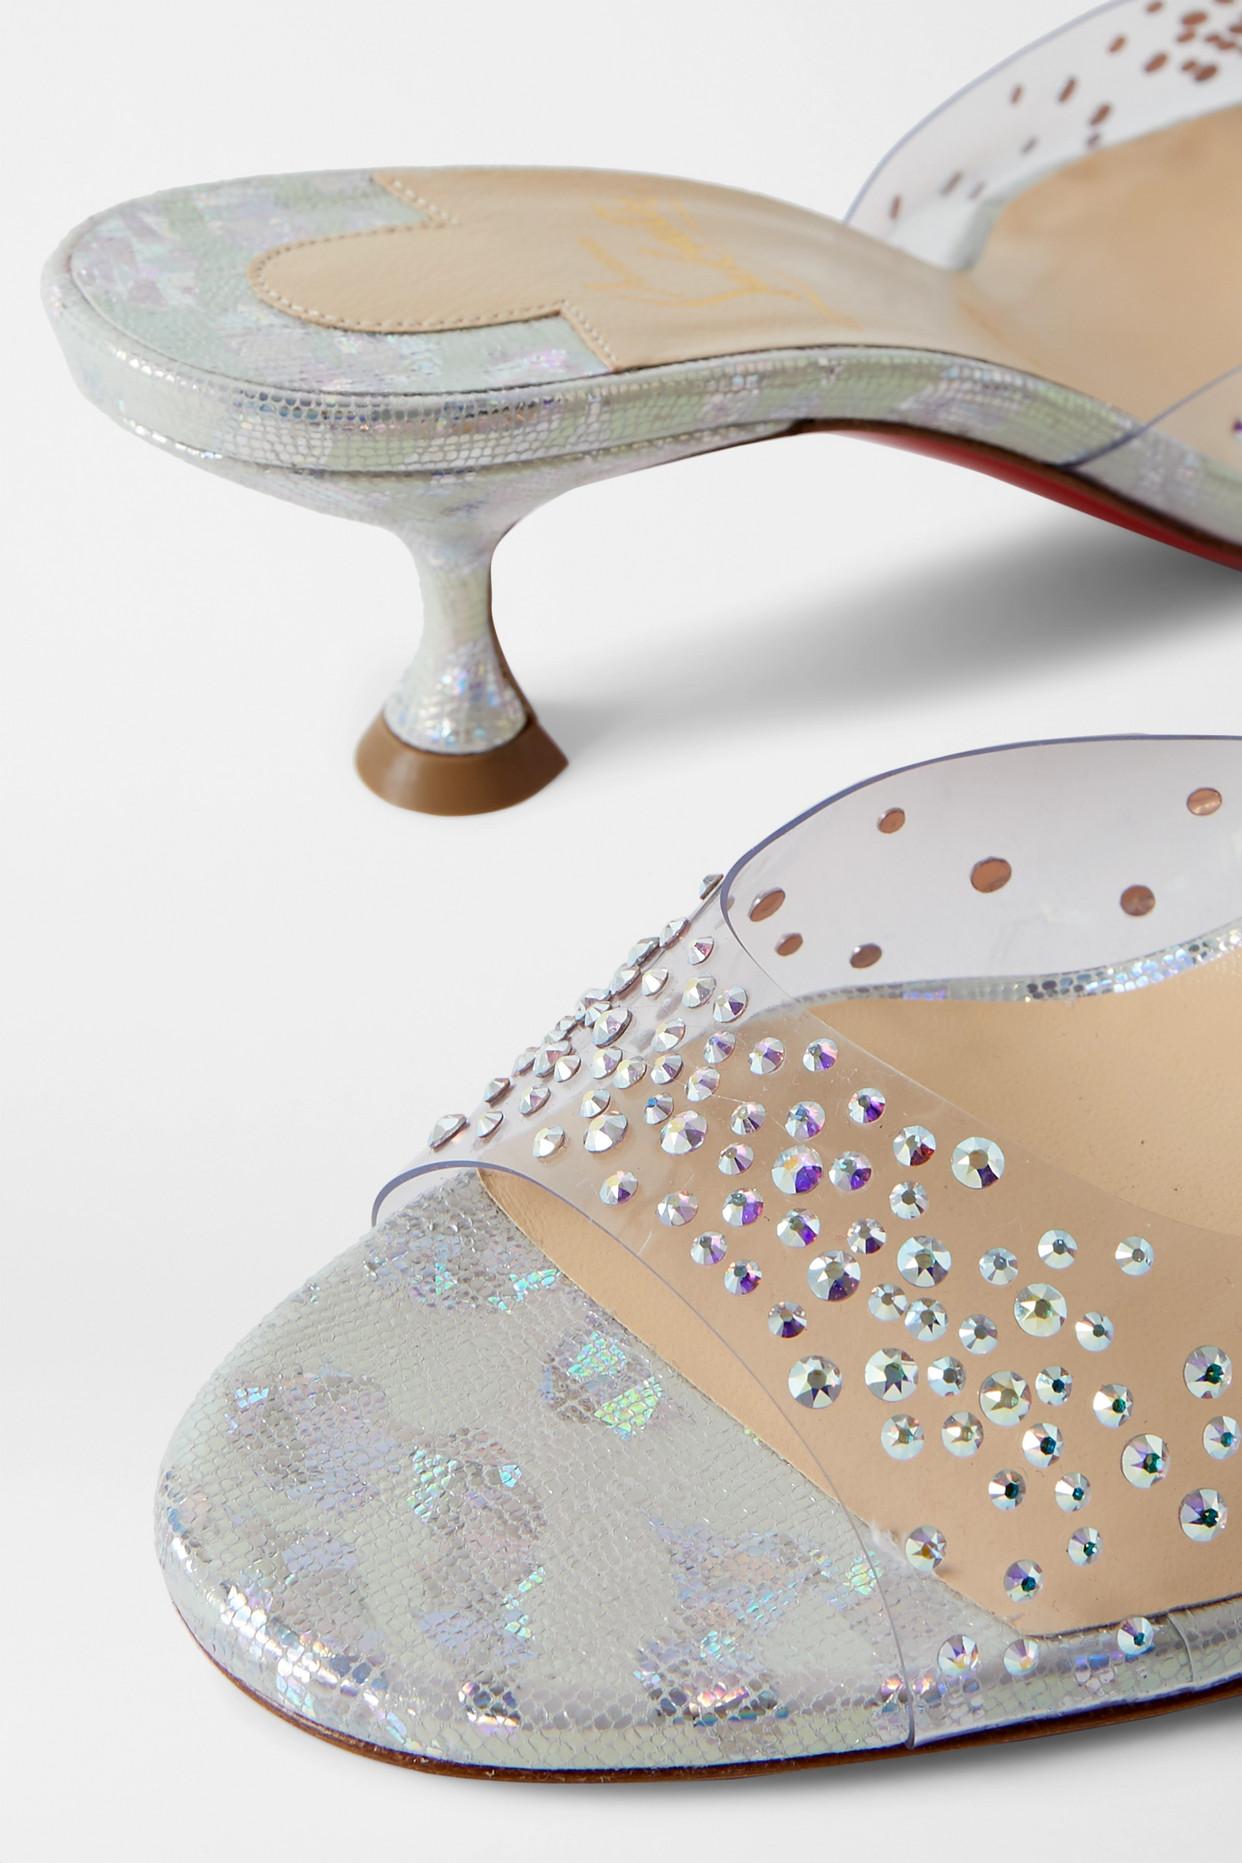 Christian Louboutin Spikaqueen 55 Crystal-embellished Pvc And